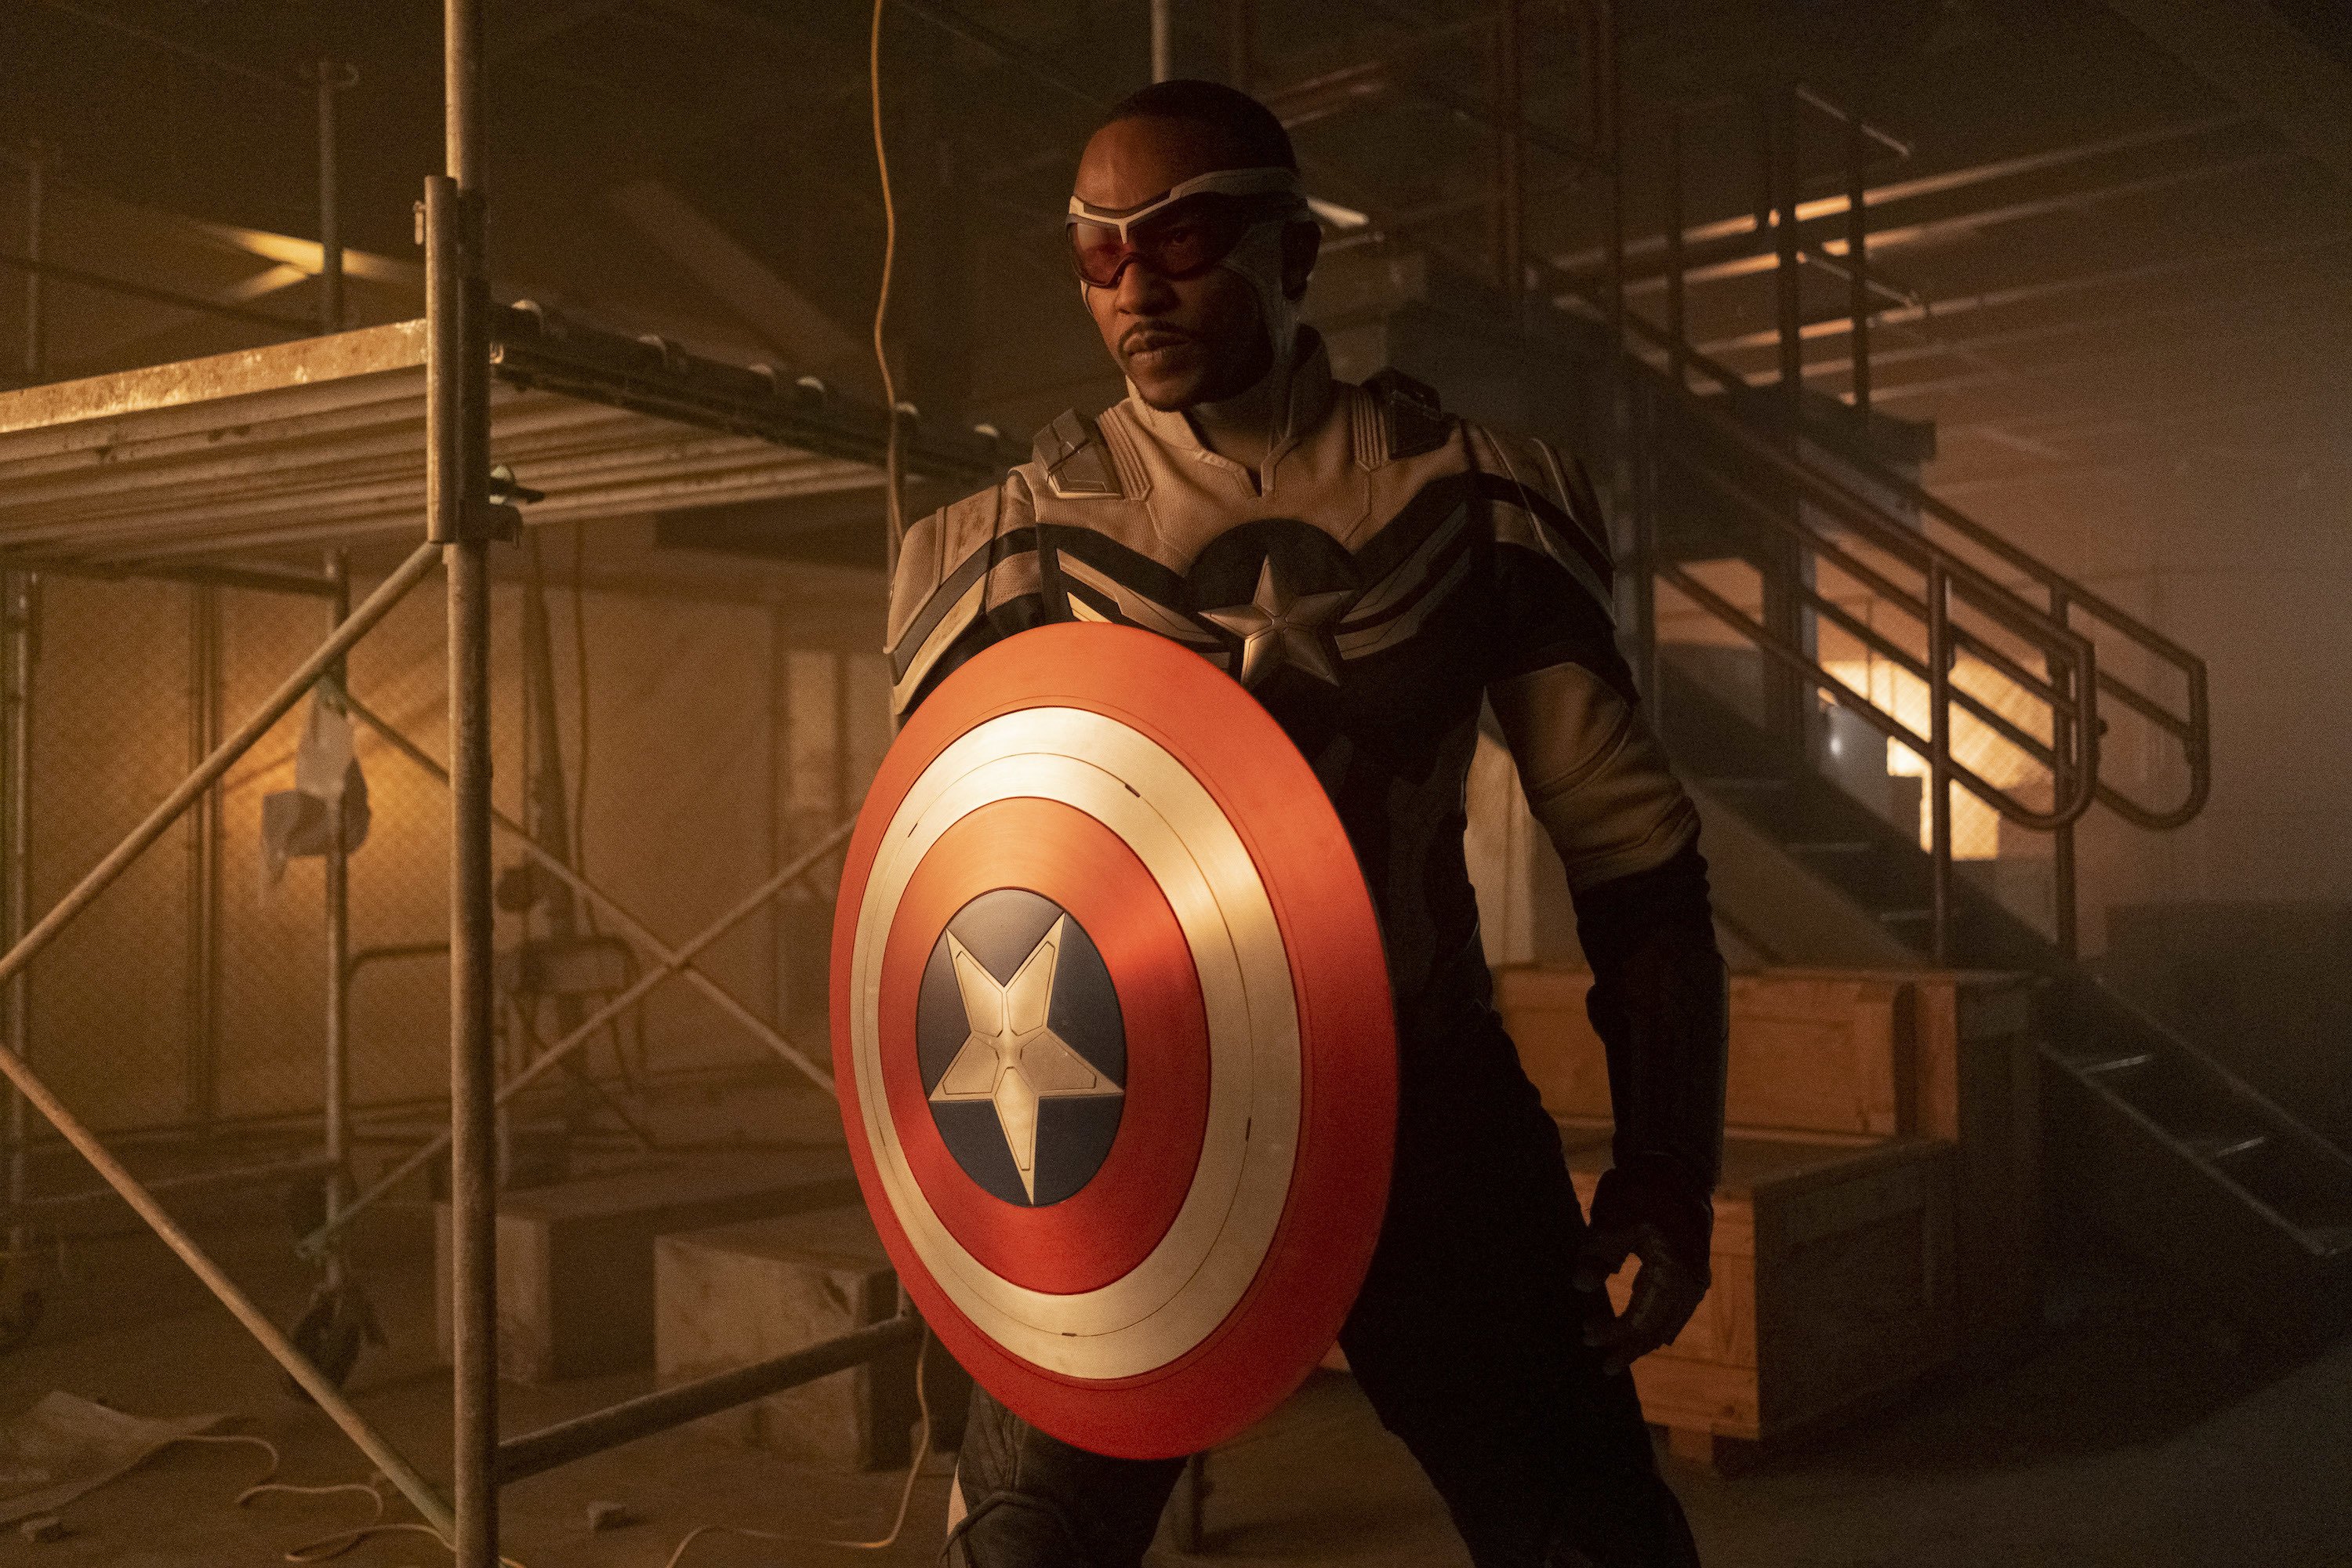 Marvel star Anthony Mackie, in character as Captain America in 'The Falcon and the Winter Soldier,' wears his red, white, and blue Captain America costume and holds his shield.